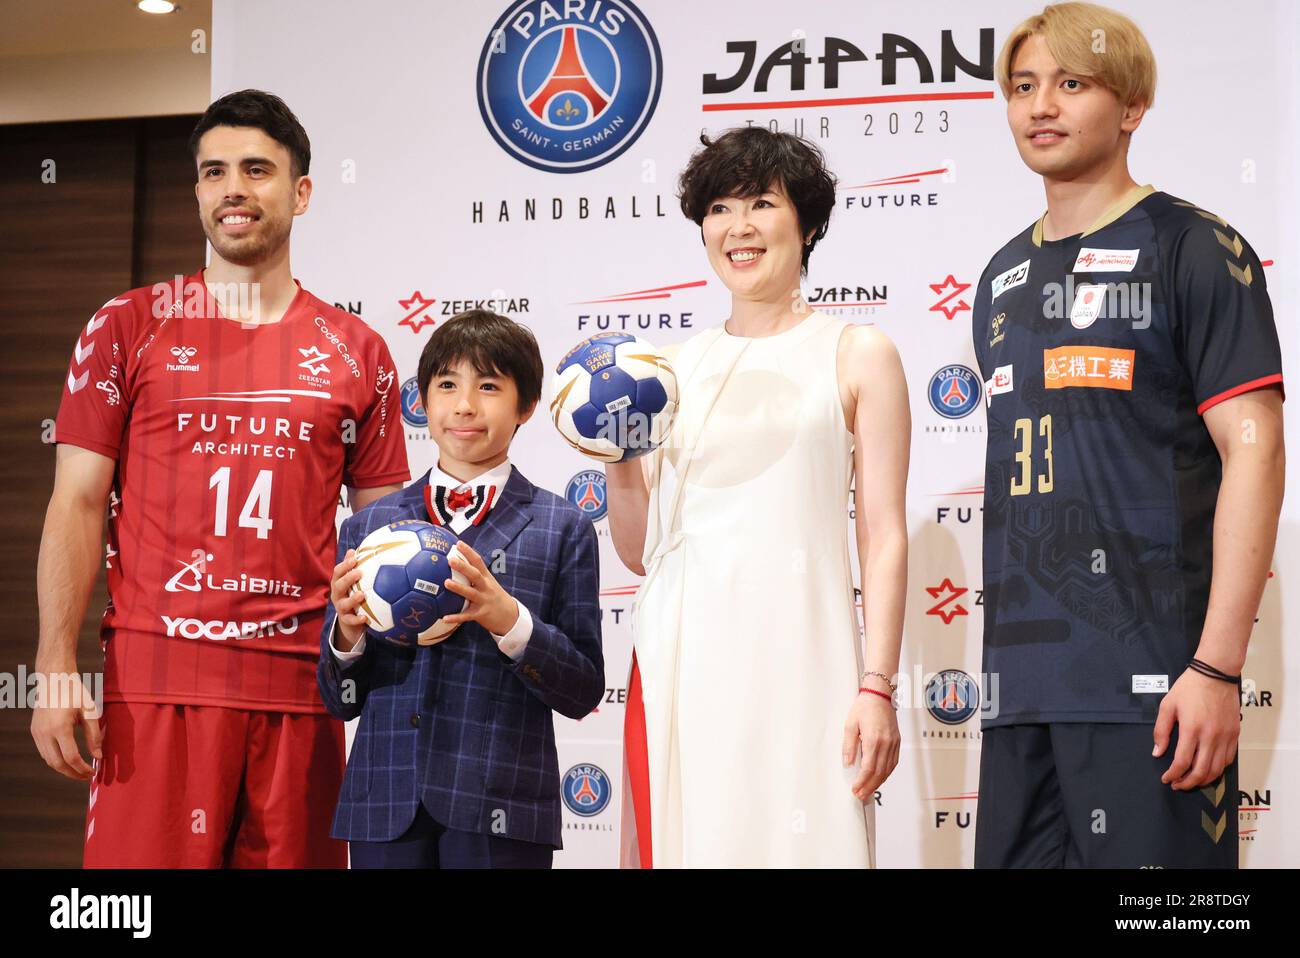 Tokyo, Japan. 22nd June, 2023. Japanese actress Shinobu Terajima (2nd R) and her son kabuki actor Mahoro Terajima (2nd L) with handball players Yuto Agarie (R) and Remi Anri Doi (L) pose for phioto as they attend a promotional event of French handball team Paris Saint-German's Japan tour in Tokyo on Thursday, June 22, 2023. Paris Saint-German handball team will have games with Zeekstar Tokyo and Japanese national team. (photo by Yoshio Tsunoda/AFLO) Stock Photo